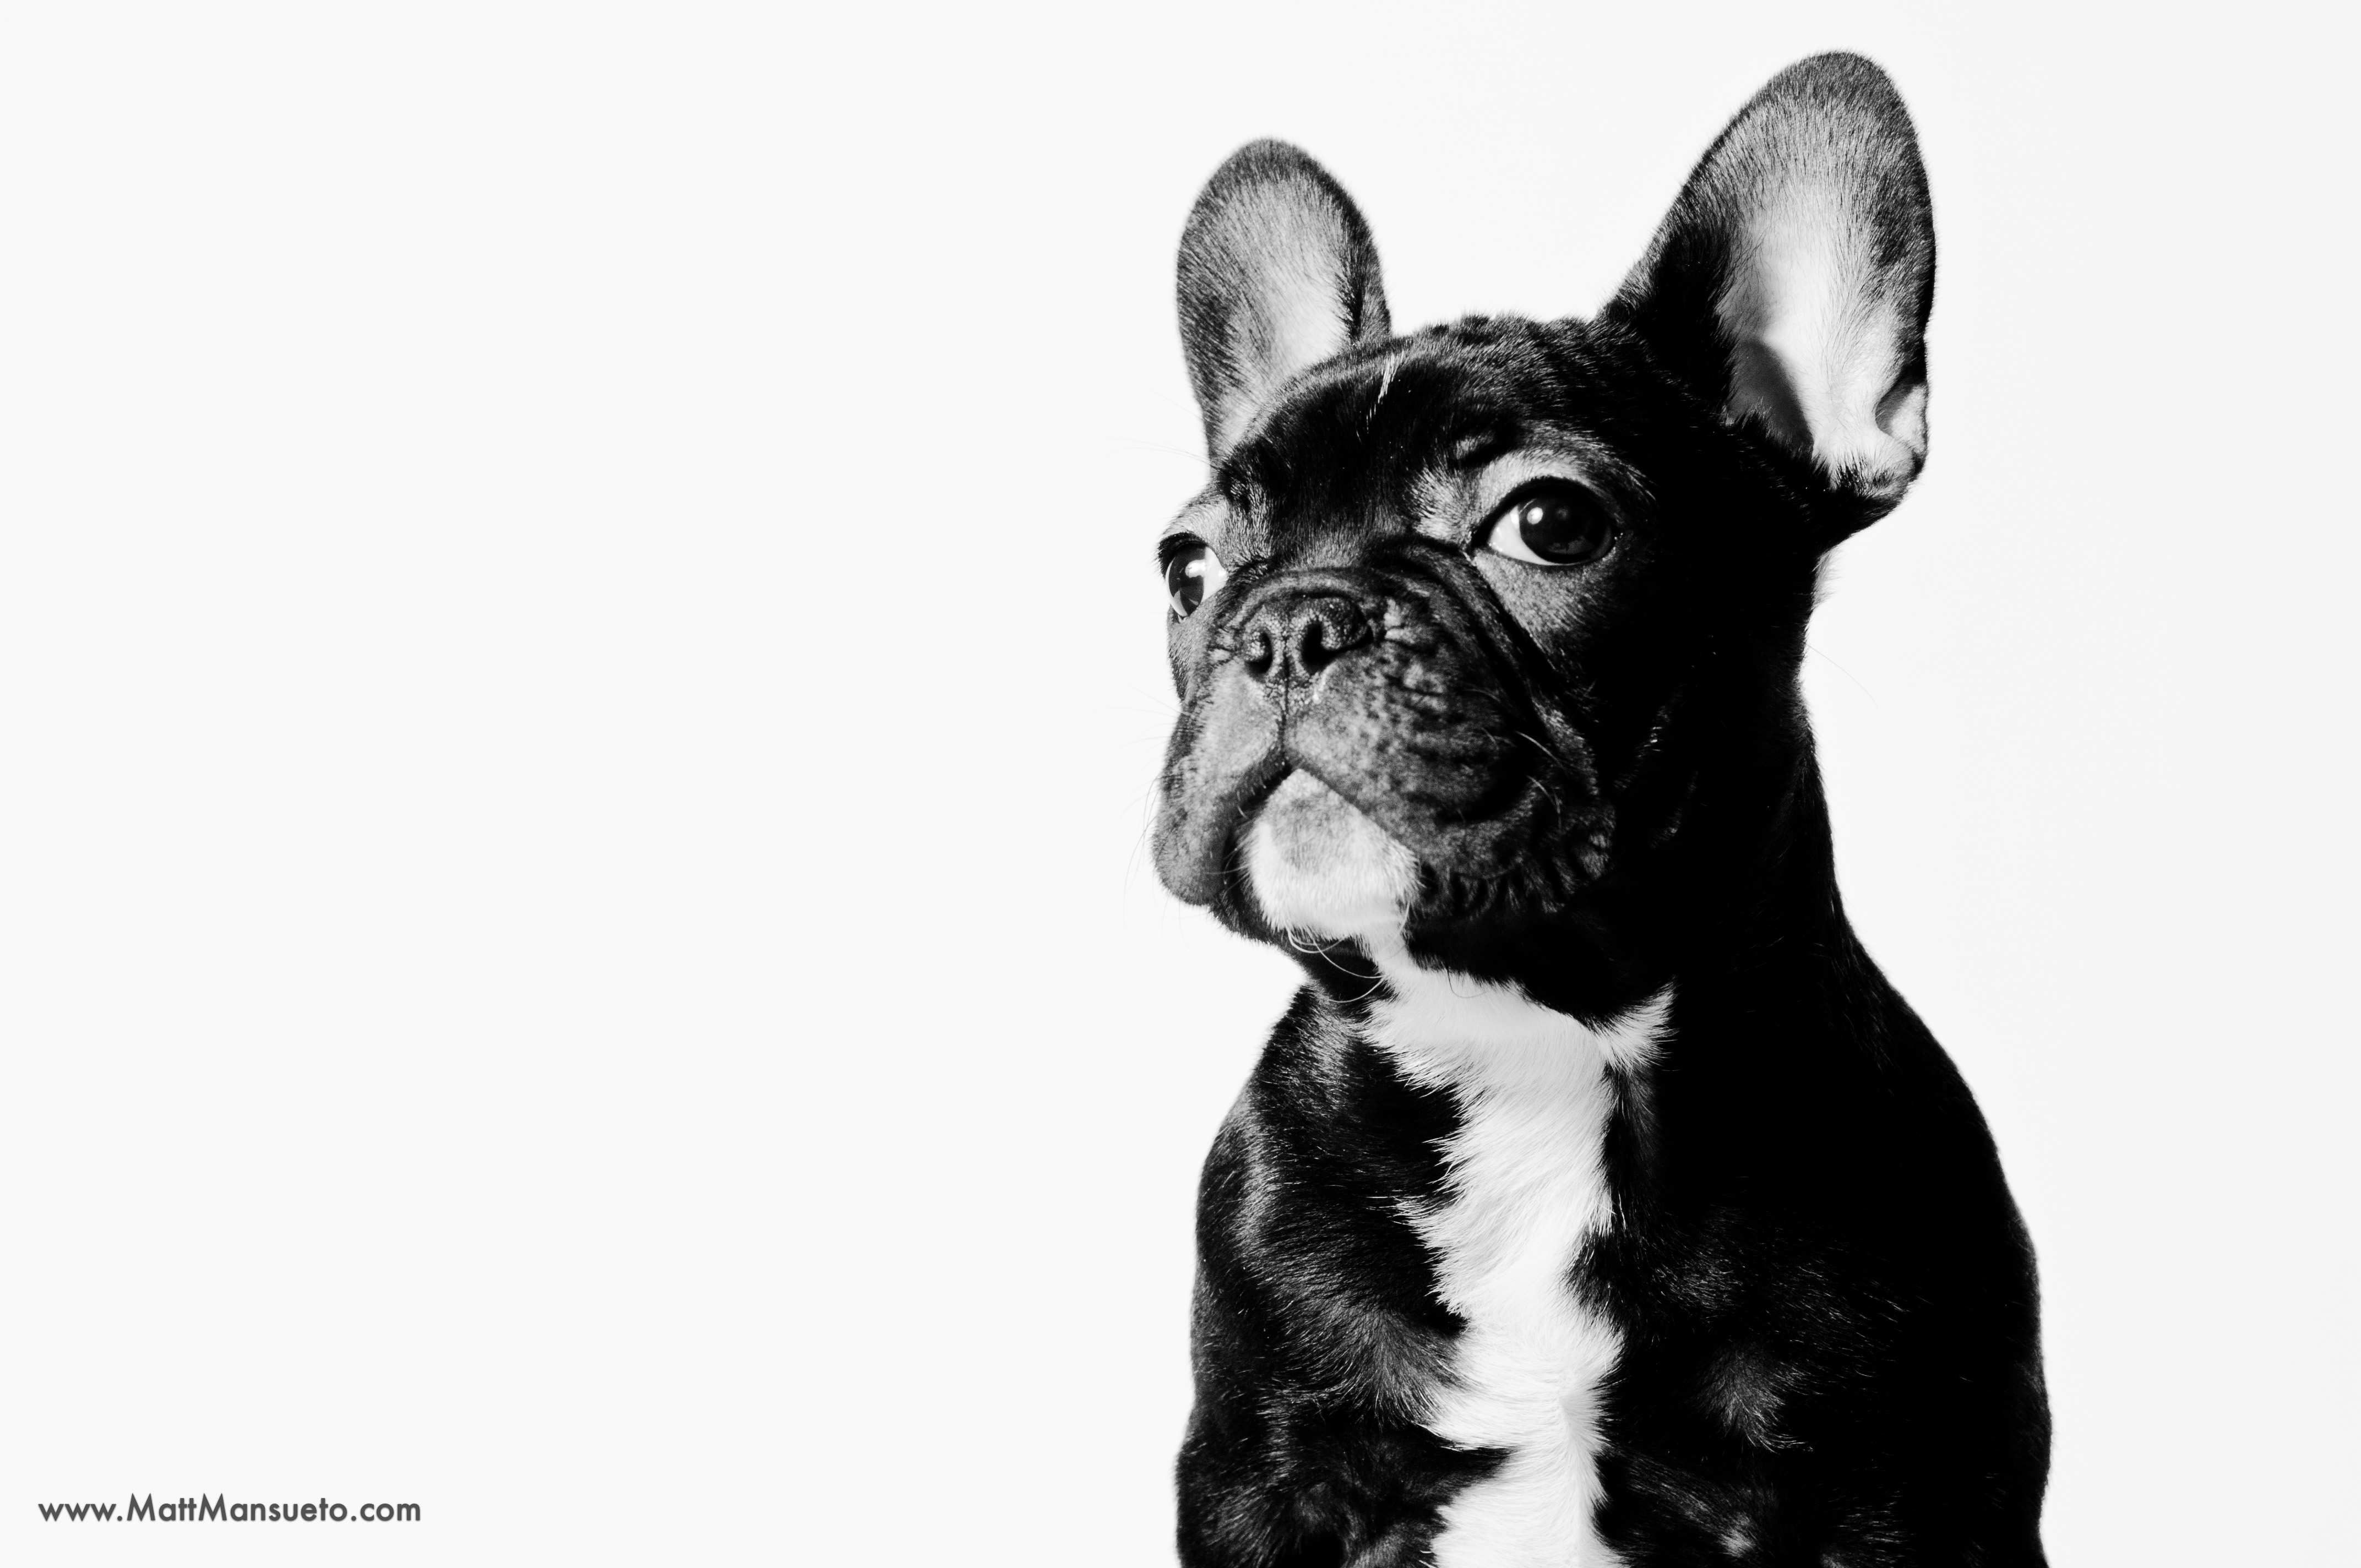 Bulldog - Like Dogs More Than People , HD Wallpaper & Backgrounds